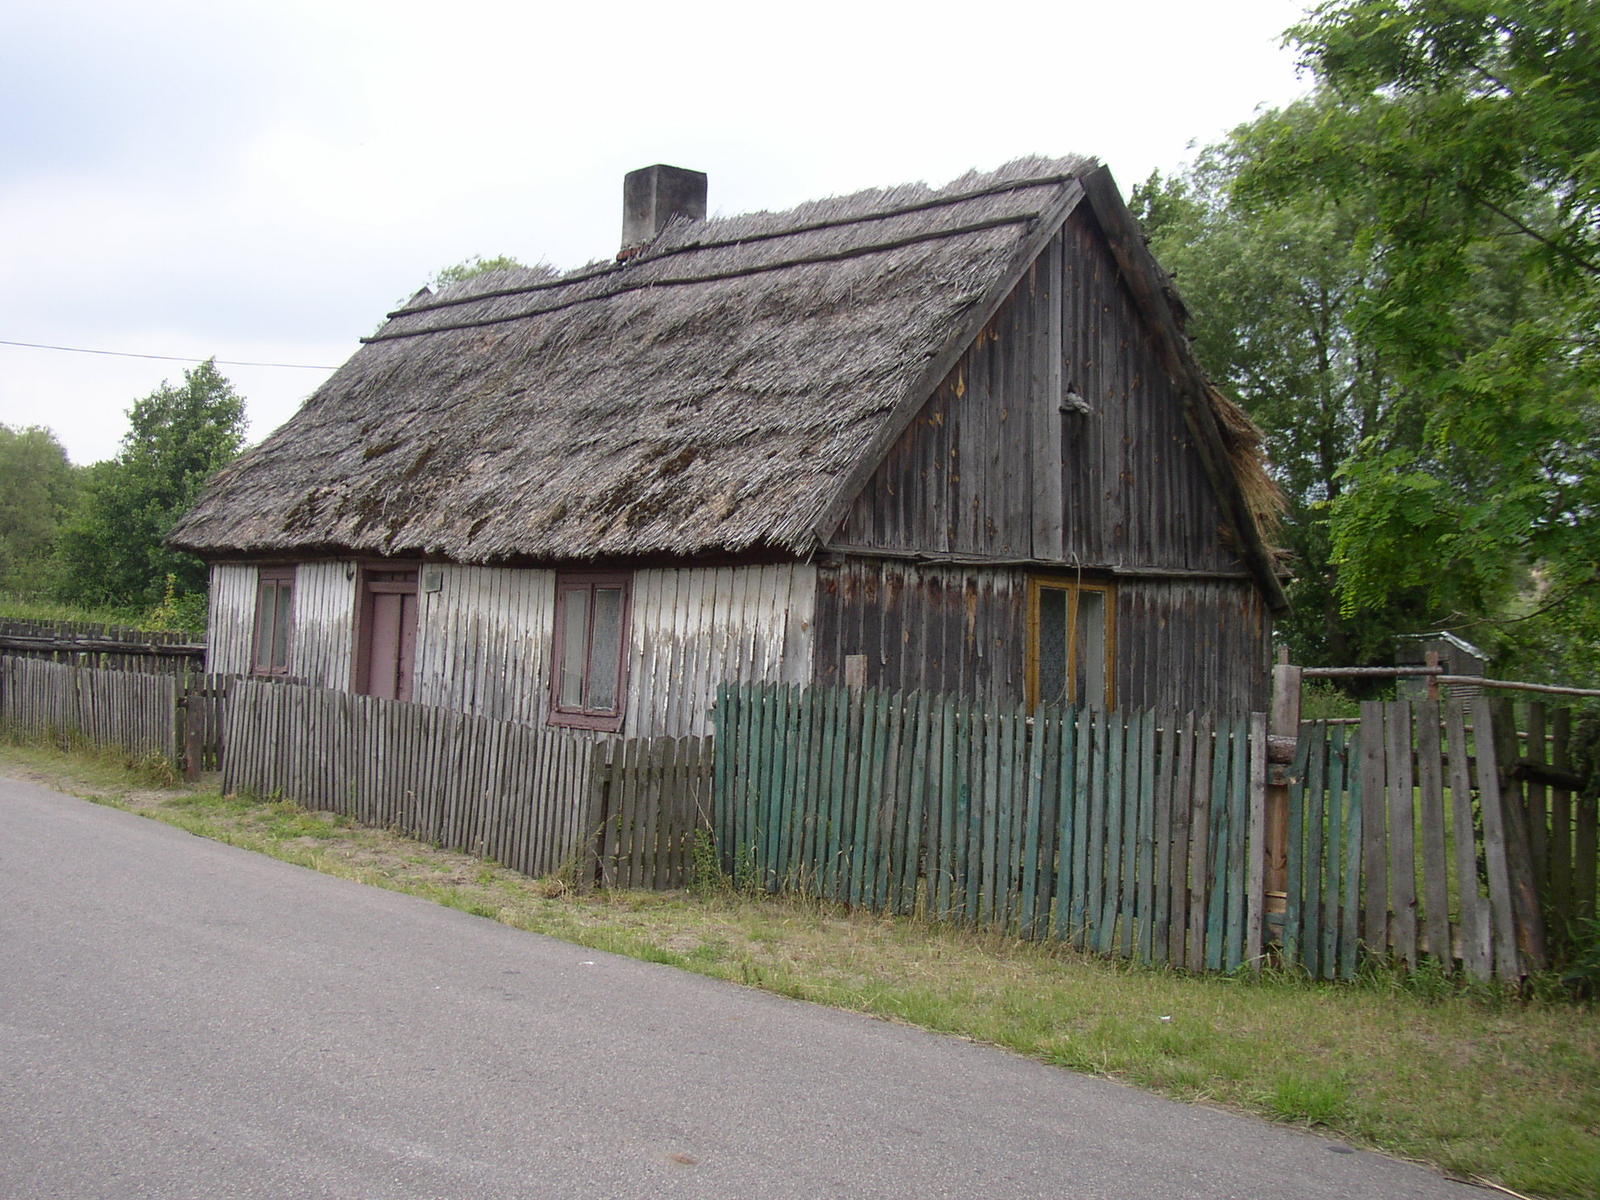 a very old wooden house with a big thatch